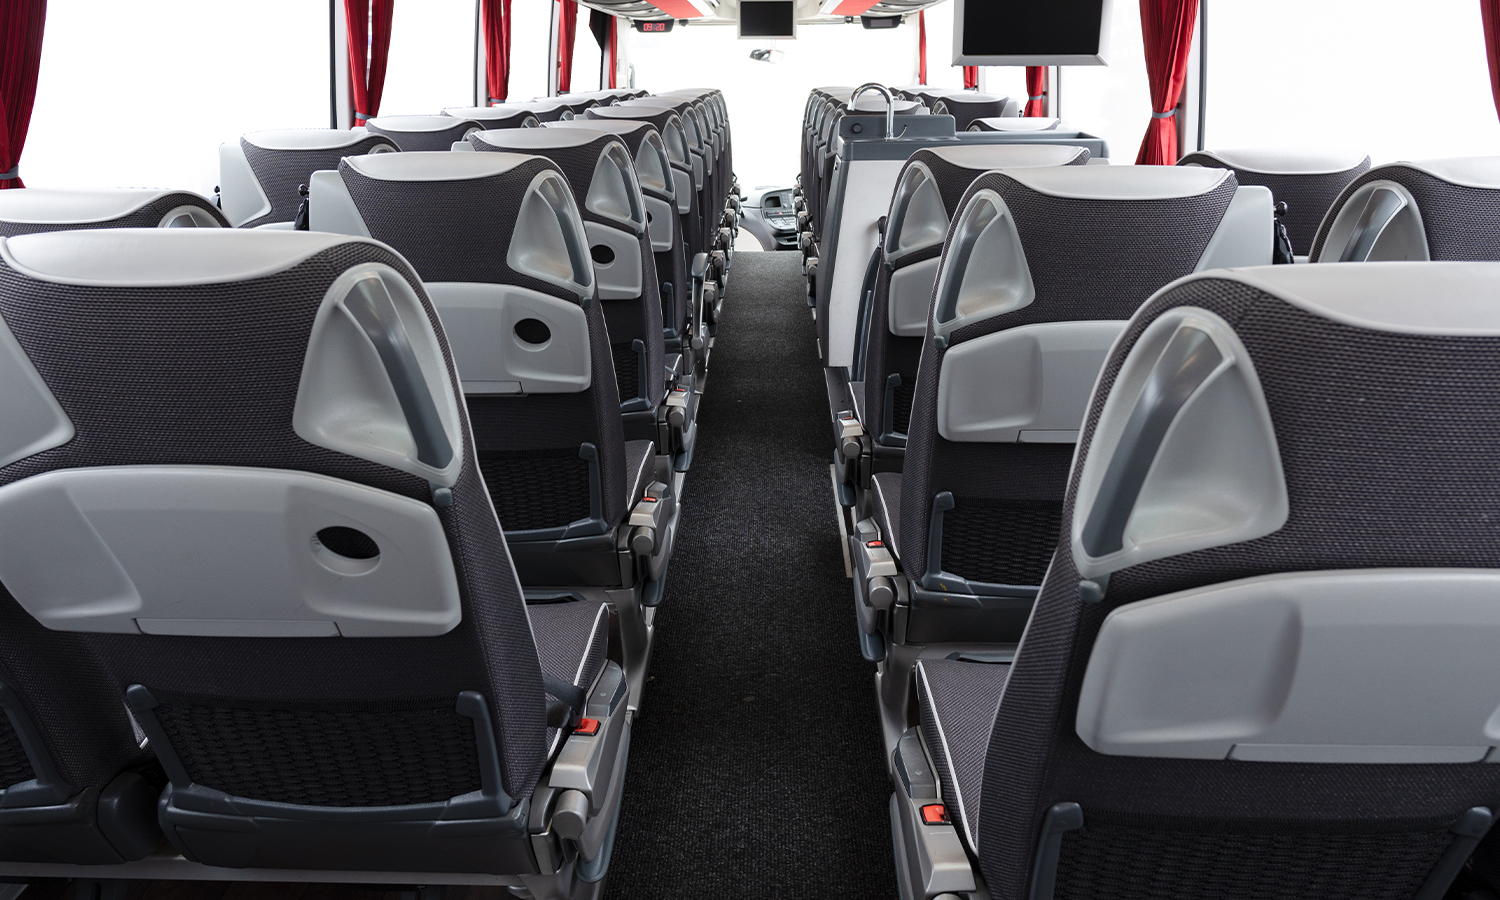 Overview of Coach Seats with Headrests and Hand Stabilisers